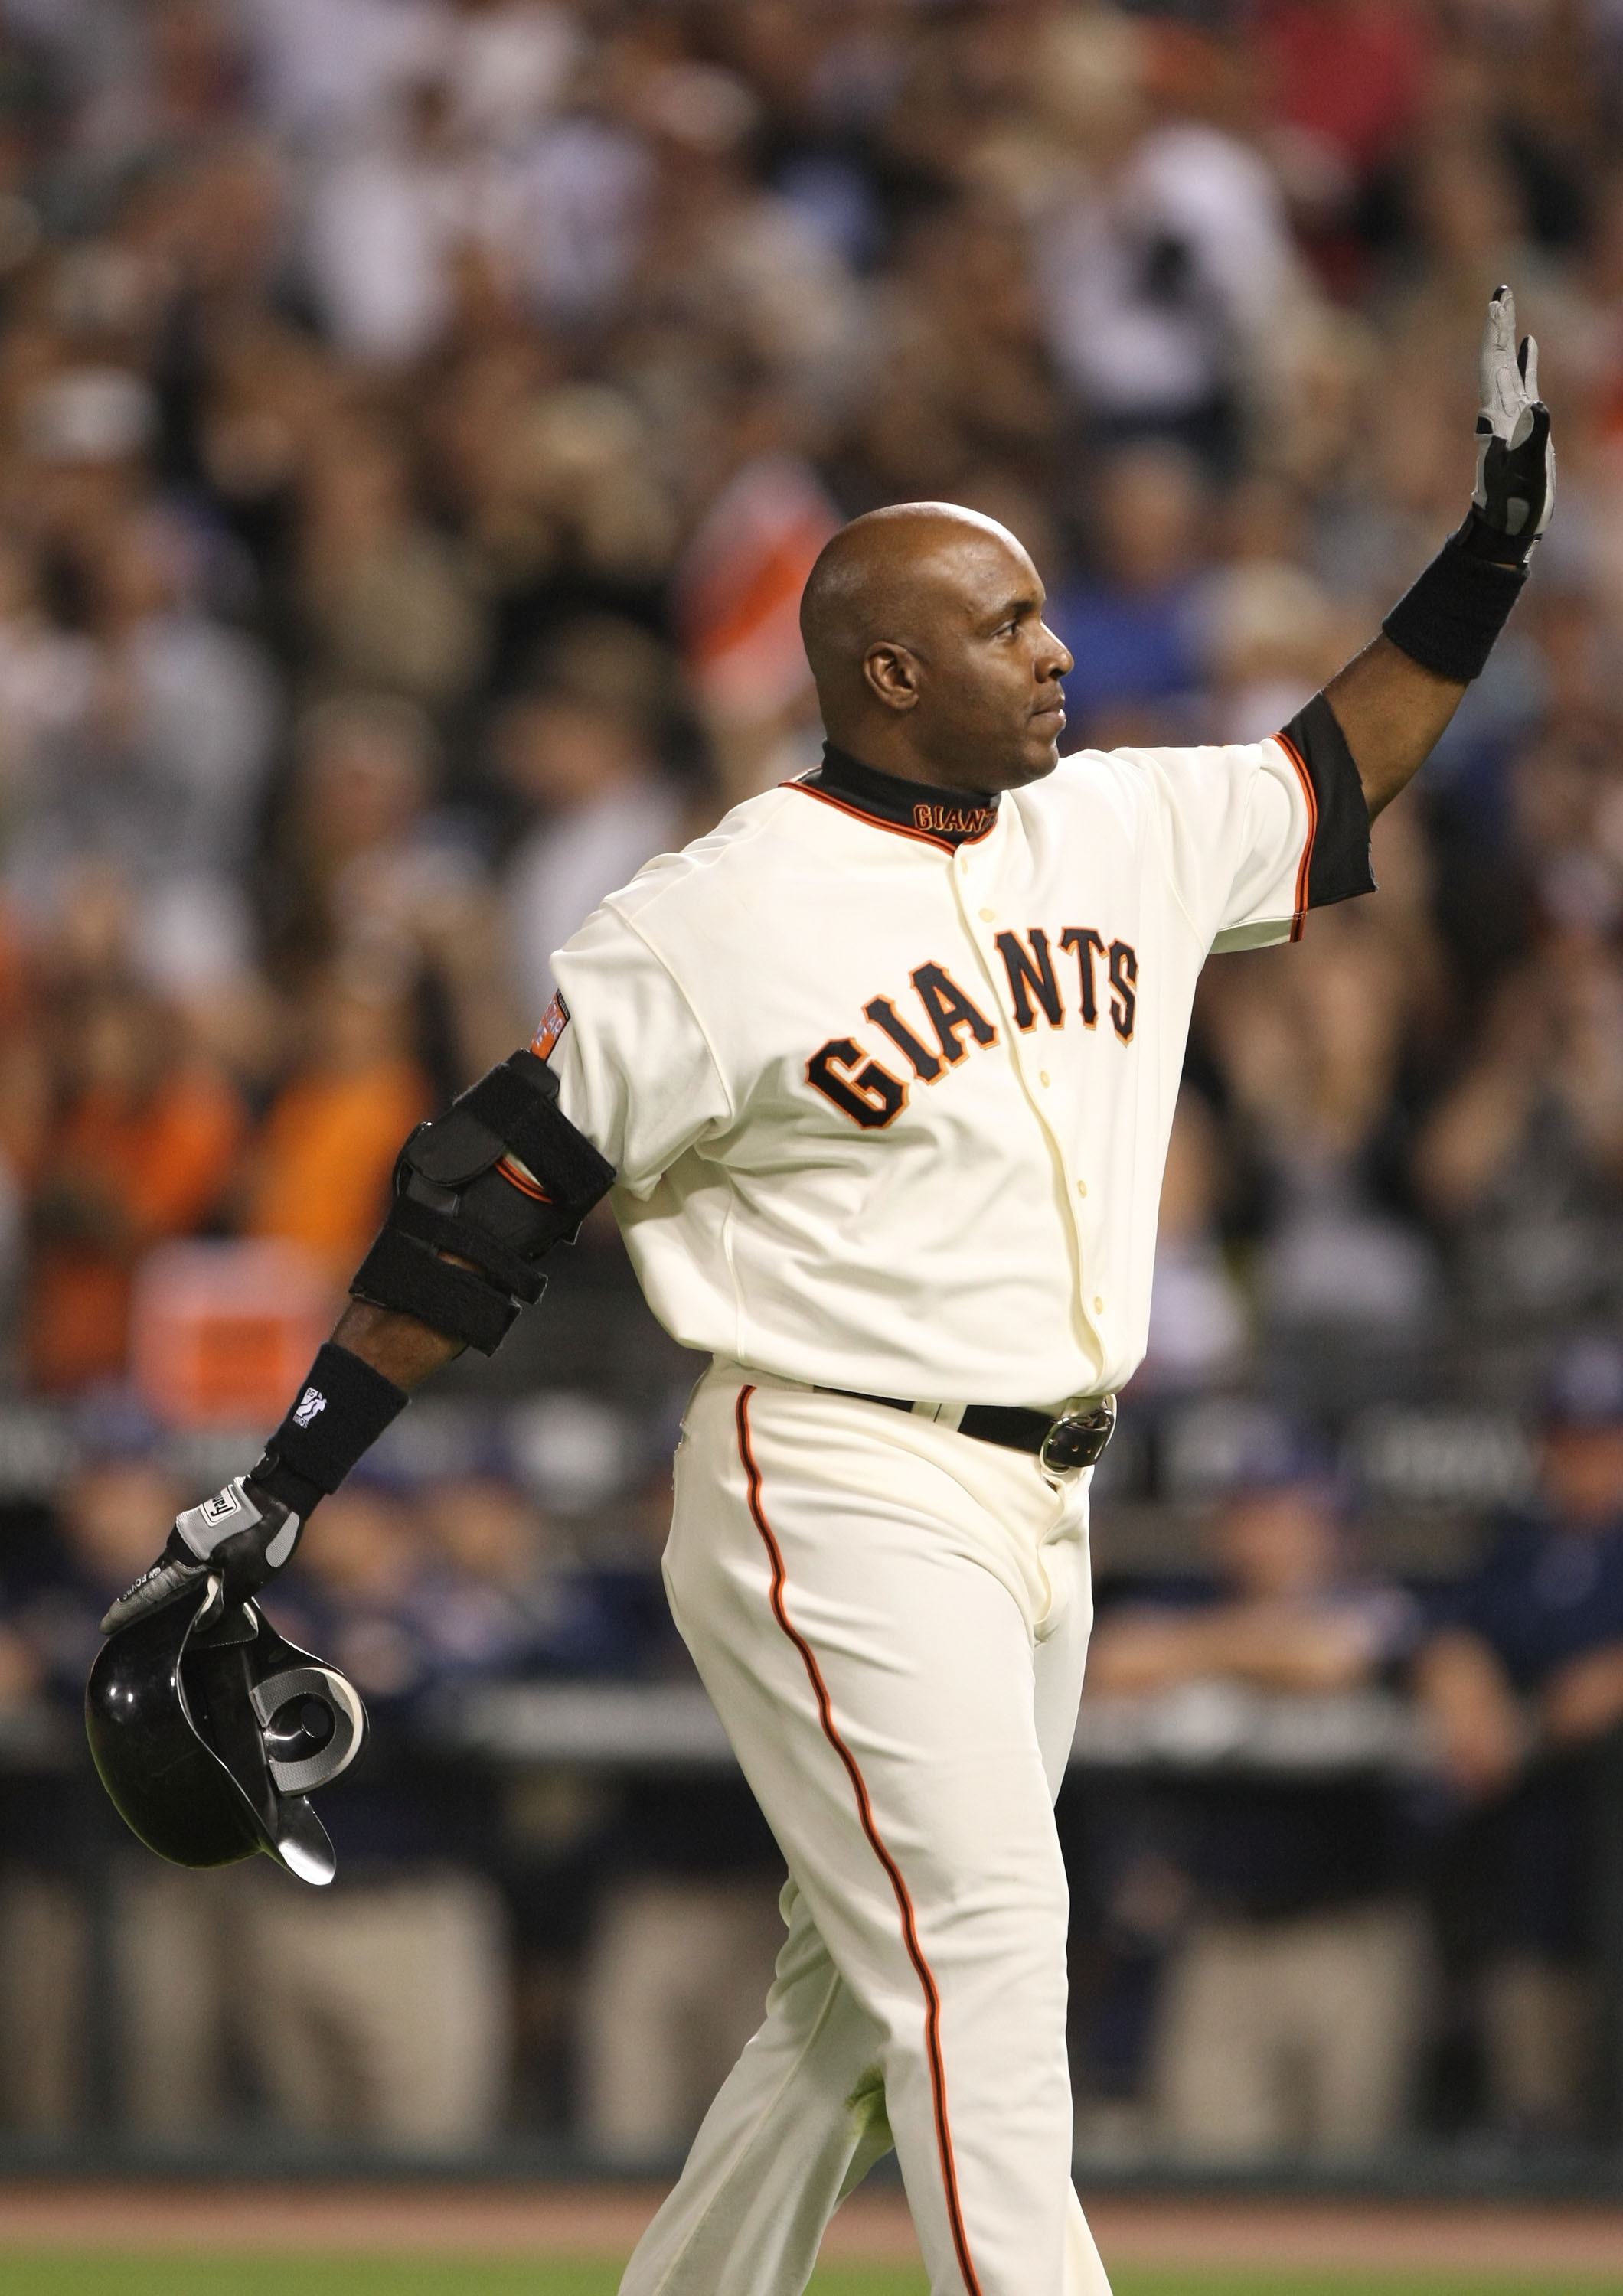 SAN FRANCISCO - SEPTEMBER 26: Barry Bonds #25 of the San Francisco Giants waves to fans as he leaves the game against the San Diego Padres at the end of the sixth inning on September 26, 2007 at AT&T Park in San Francisco, California. Tonight will be the